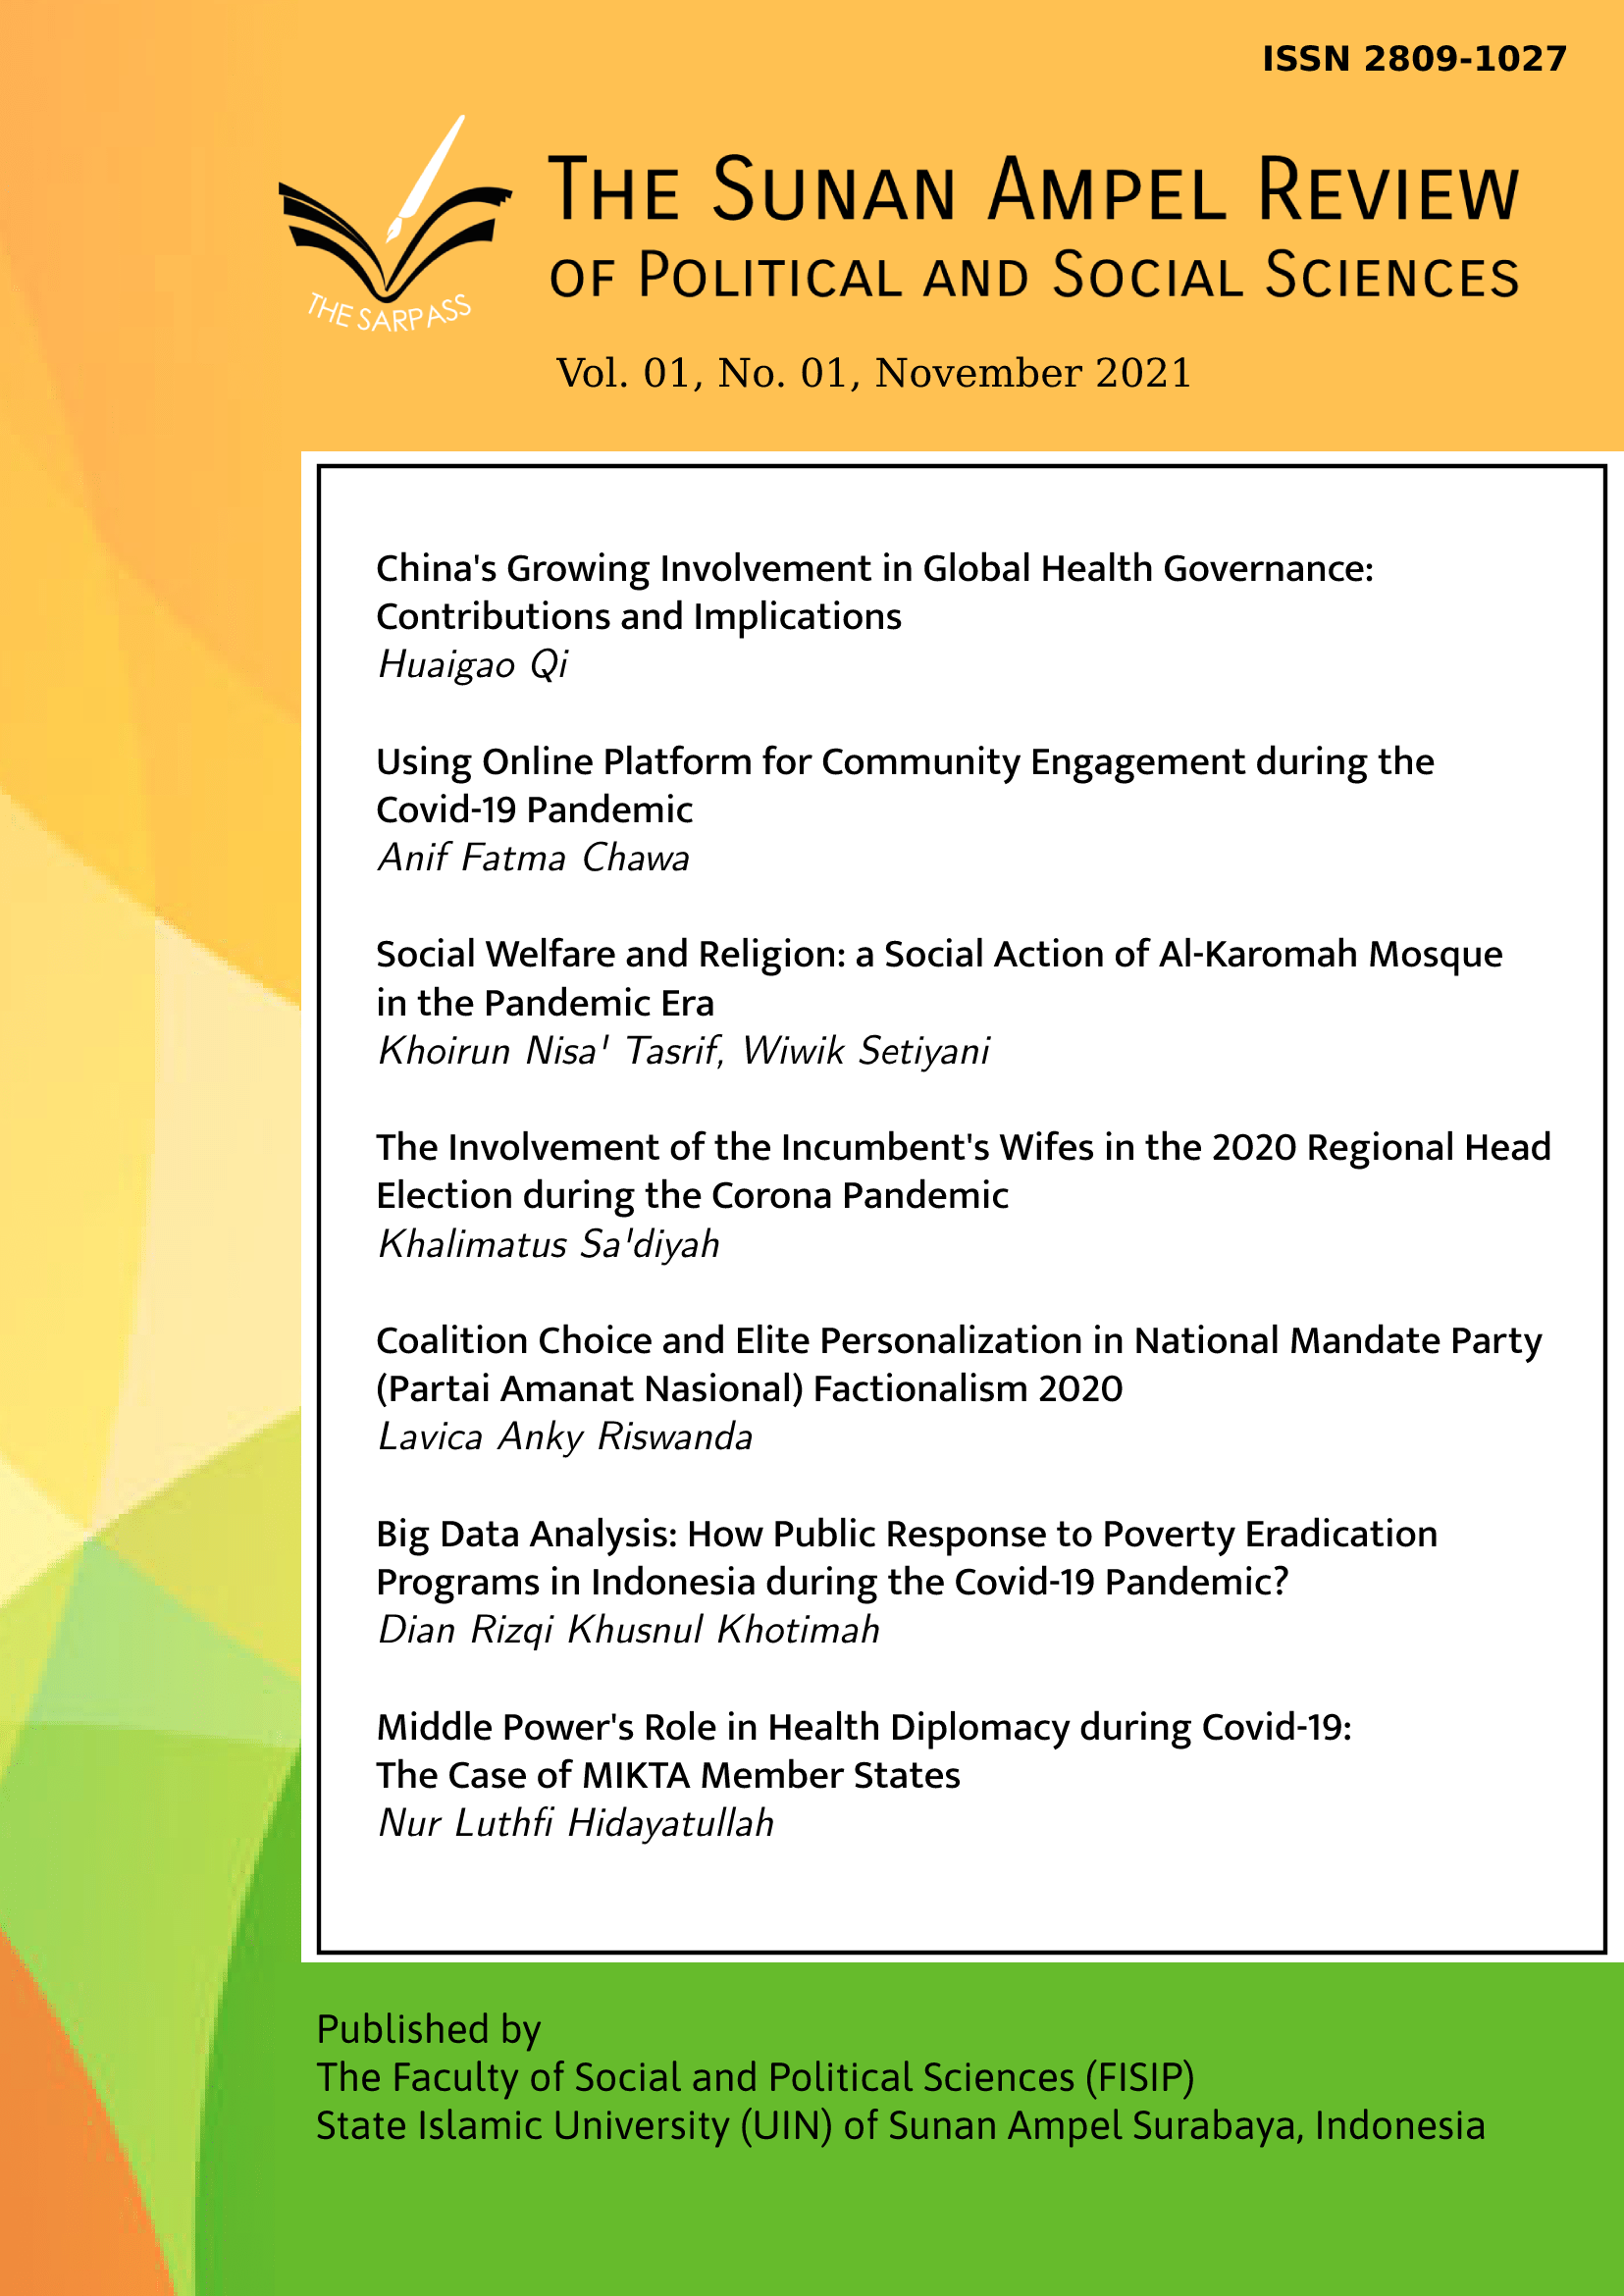 					View Vol. 1 No. 1 (2021): The Sunan Ampel Review of Political and Social Sciences
				